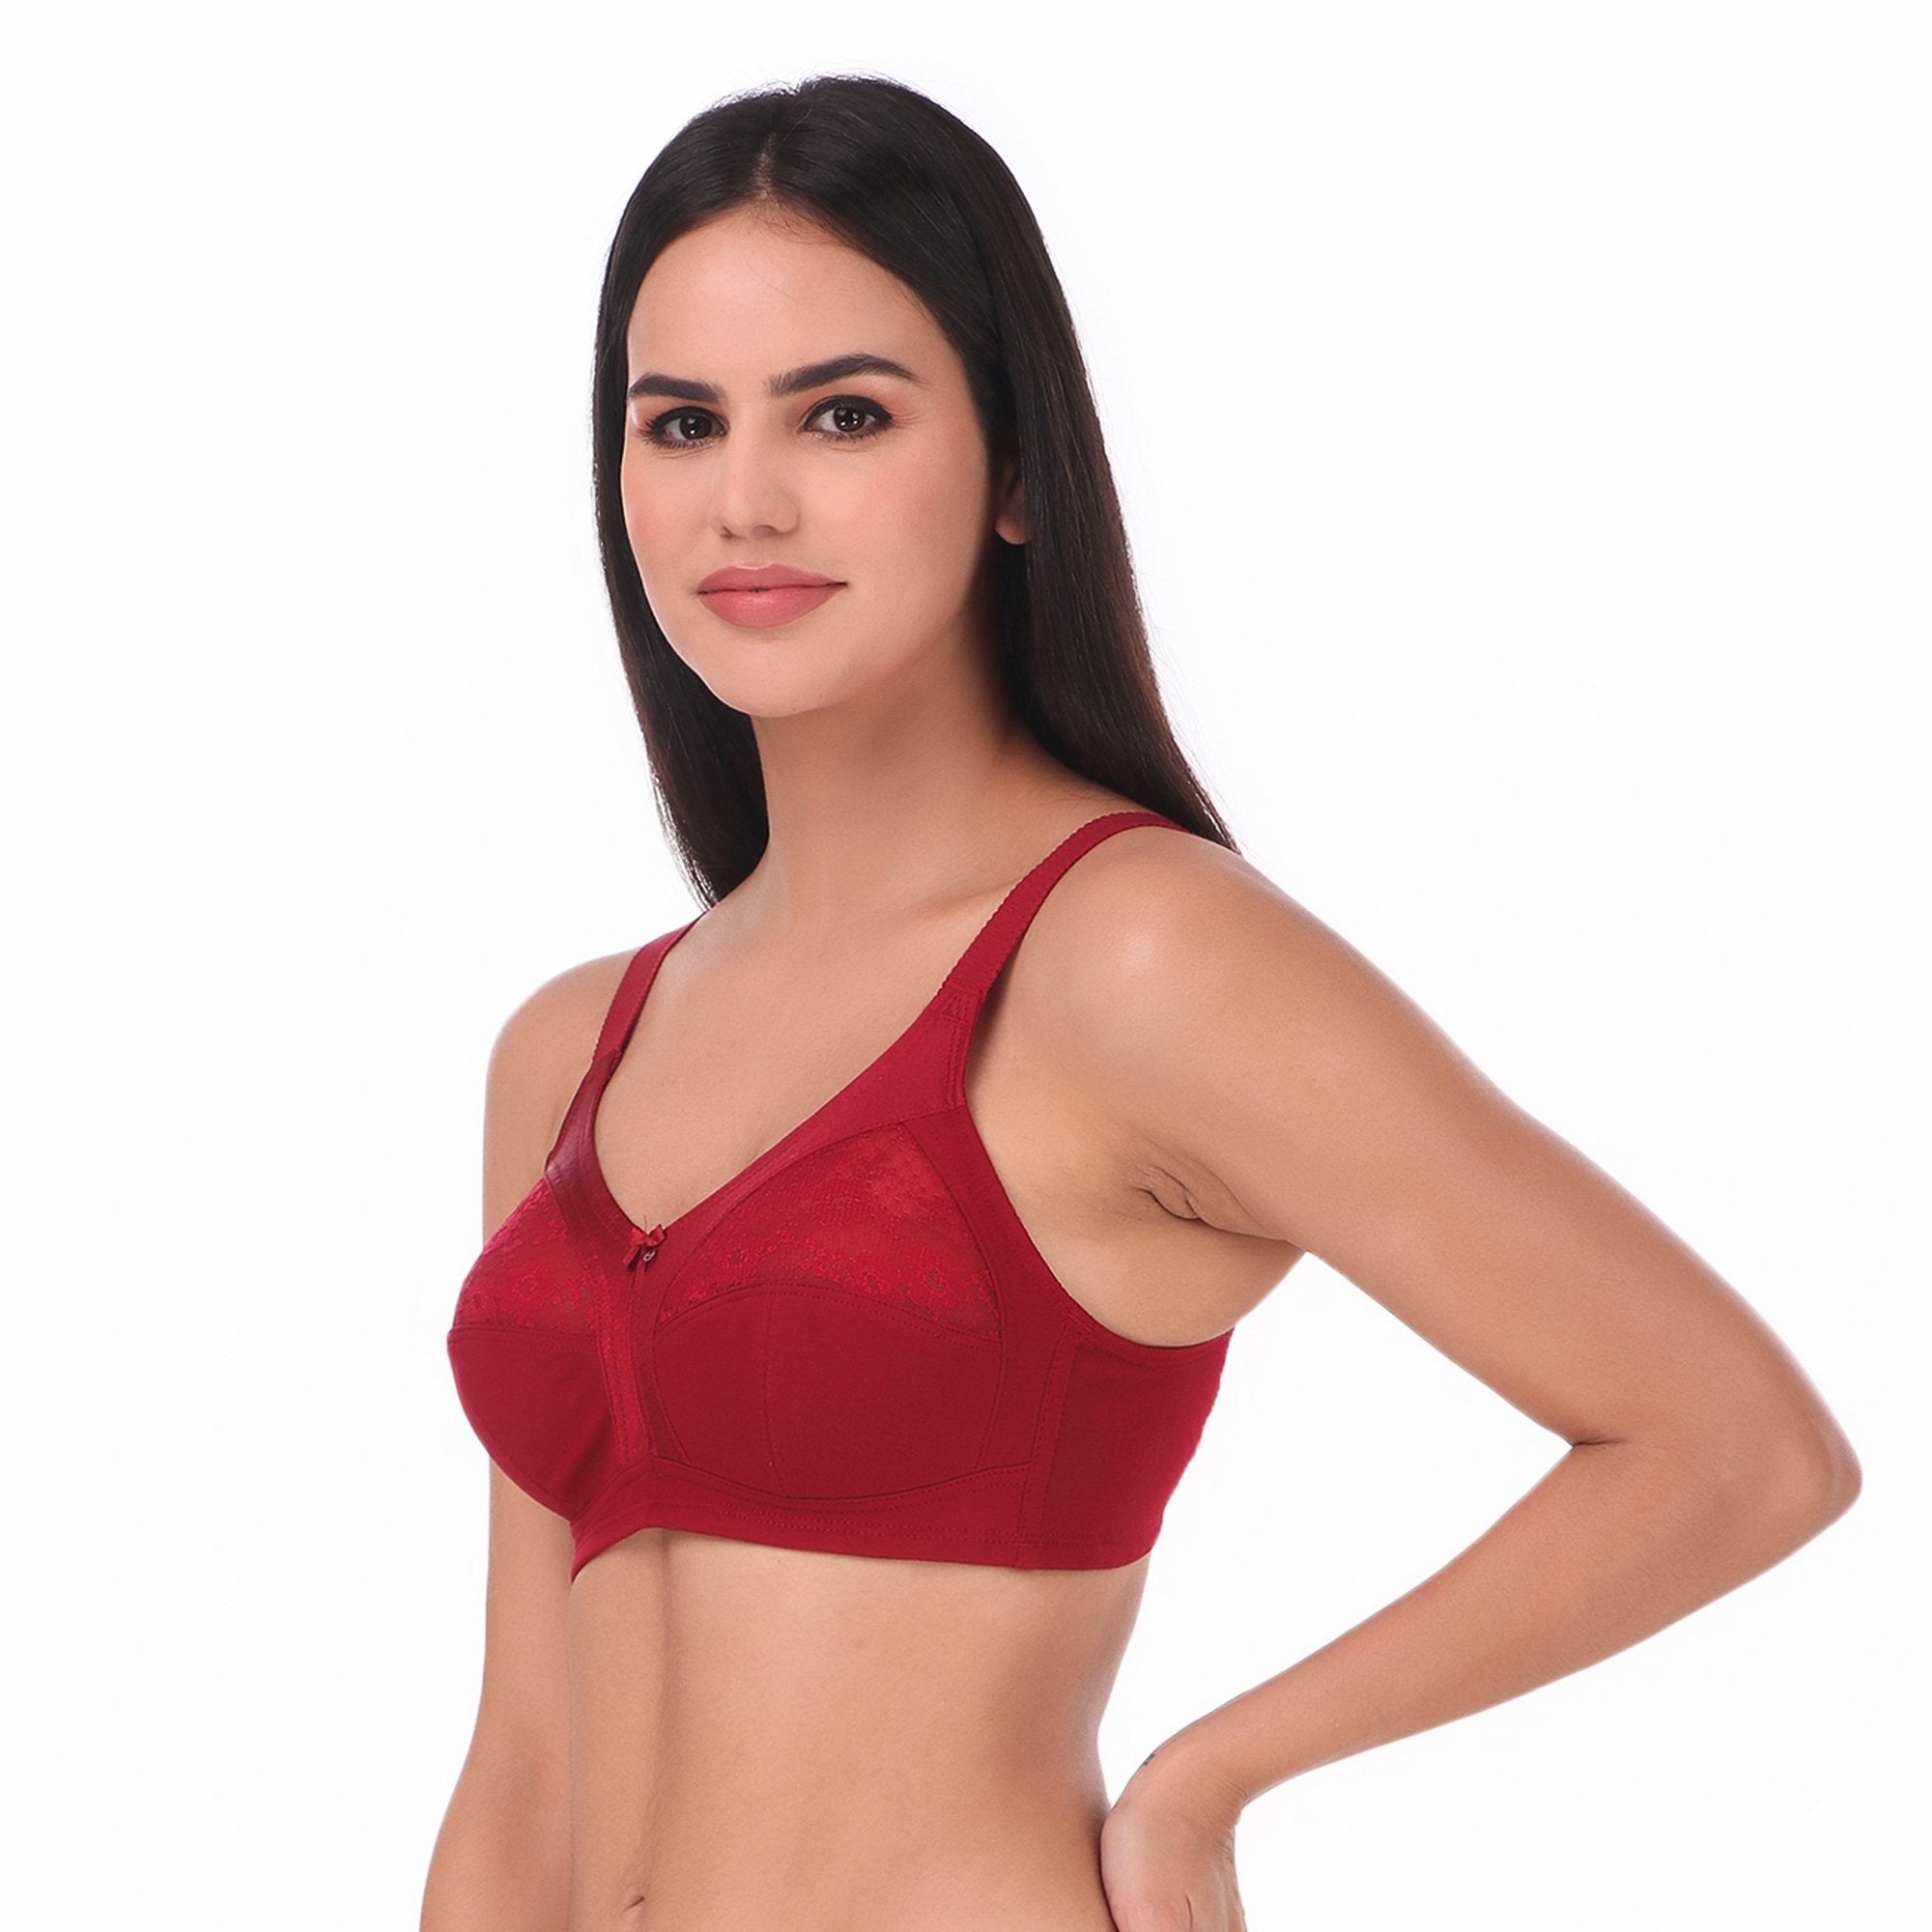 Meesho Supply - Whatsapp ->  (+918954478349) _One of  the basic innerwear for women is the bra. The COTTON/HOSIERY-made Bra  provides comfort, irritation-free and seamless facility. The comfy fabric  will restore moisture